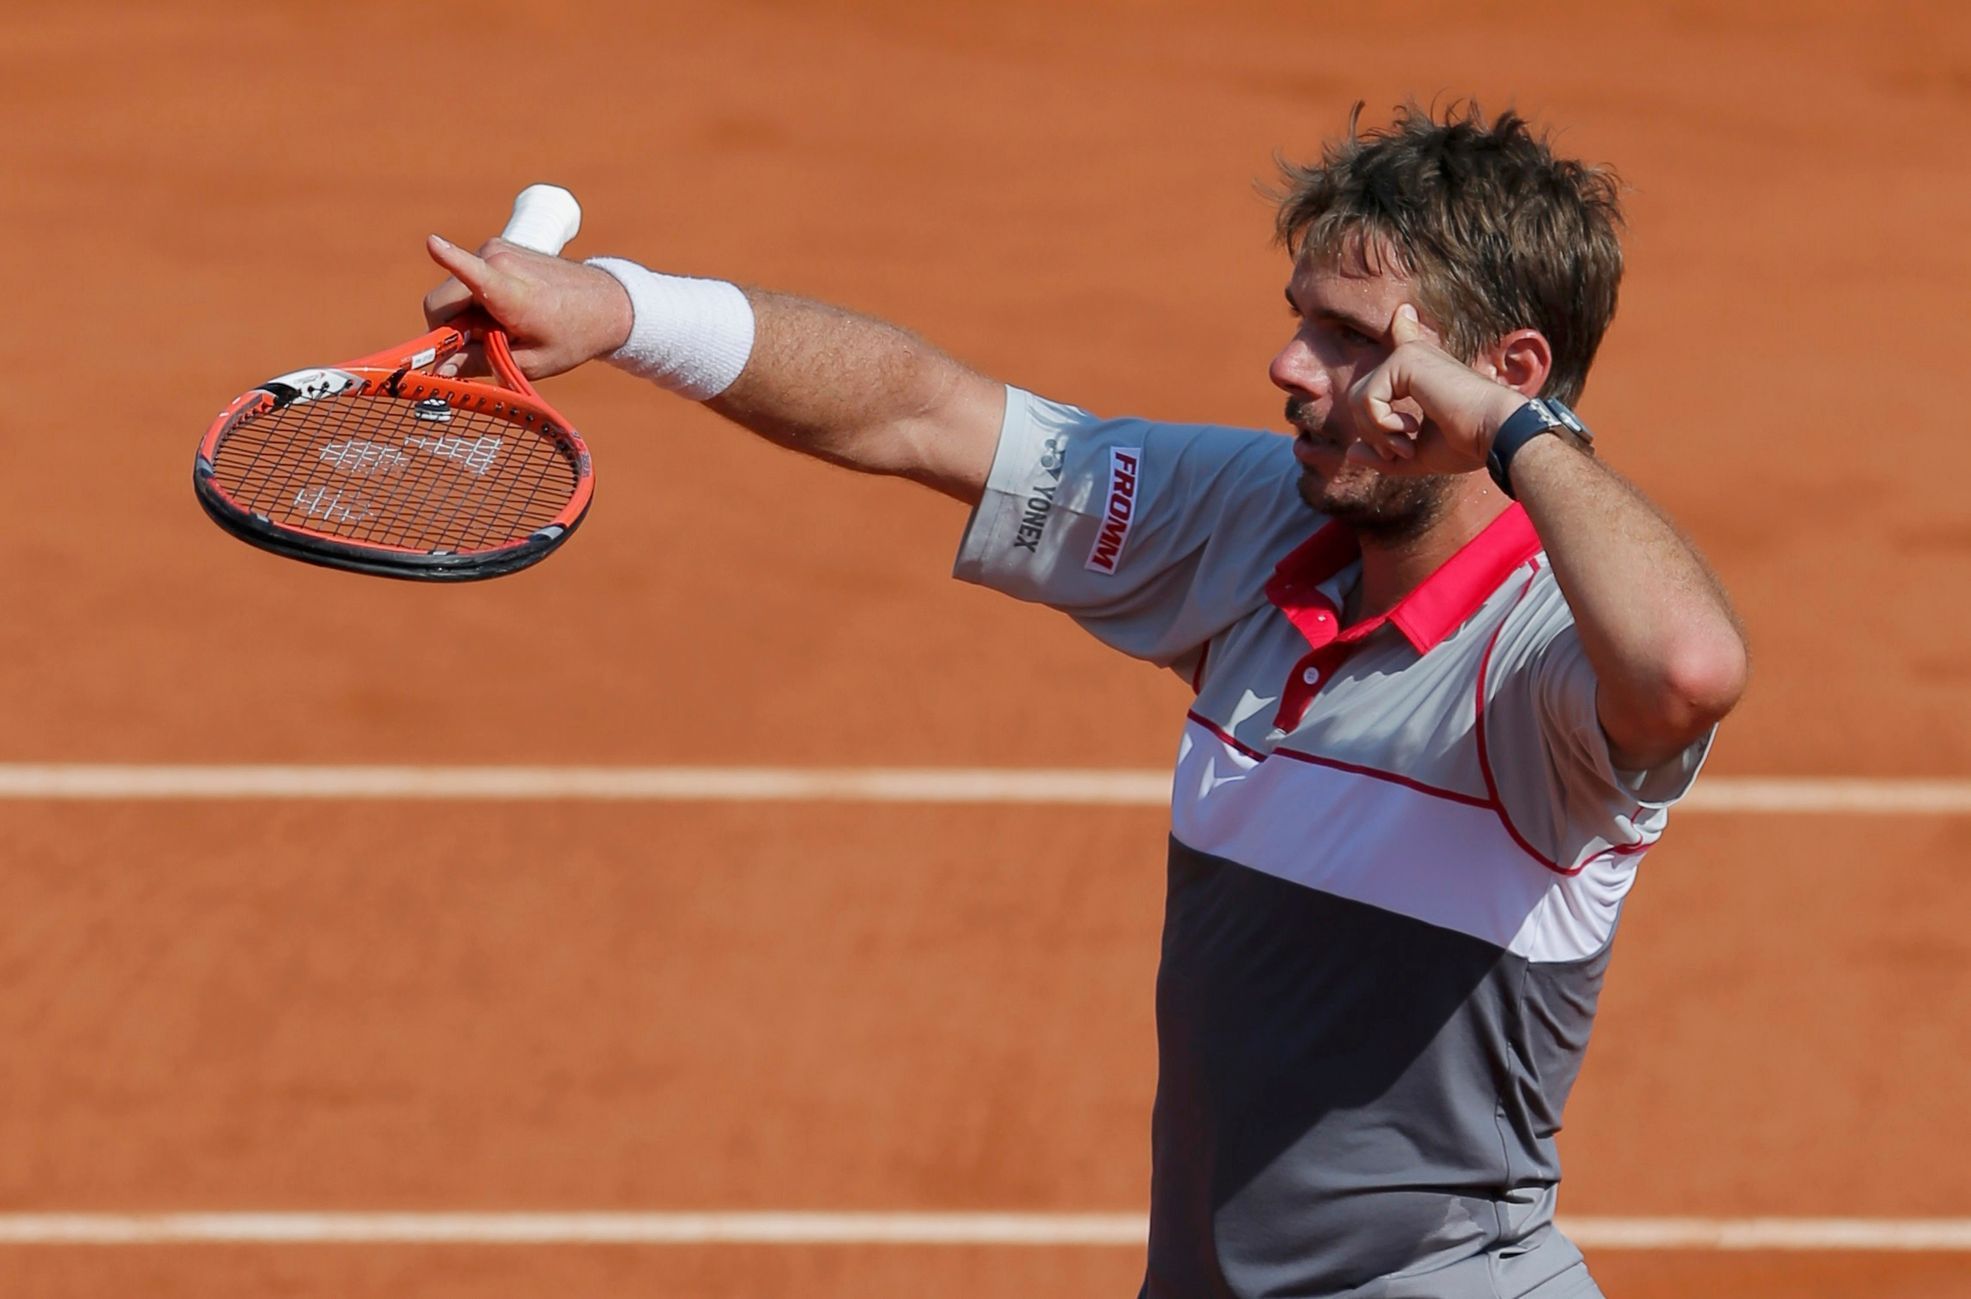 Stan Wawrinka of Switzerland celebrates after defeating Jo-Wilfried Tsonga of France during their men's semi-final match at the French Open tennis tournament at the Roland Garros stadium in Paris